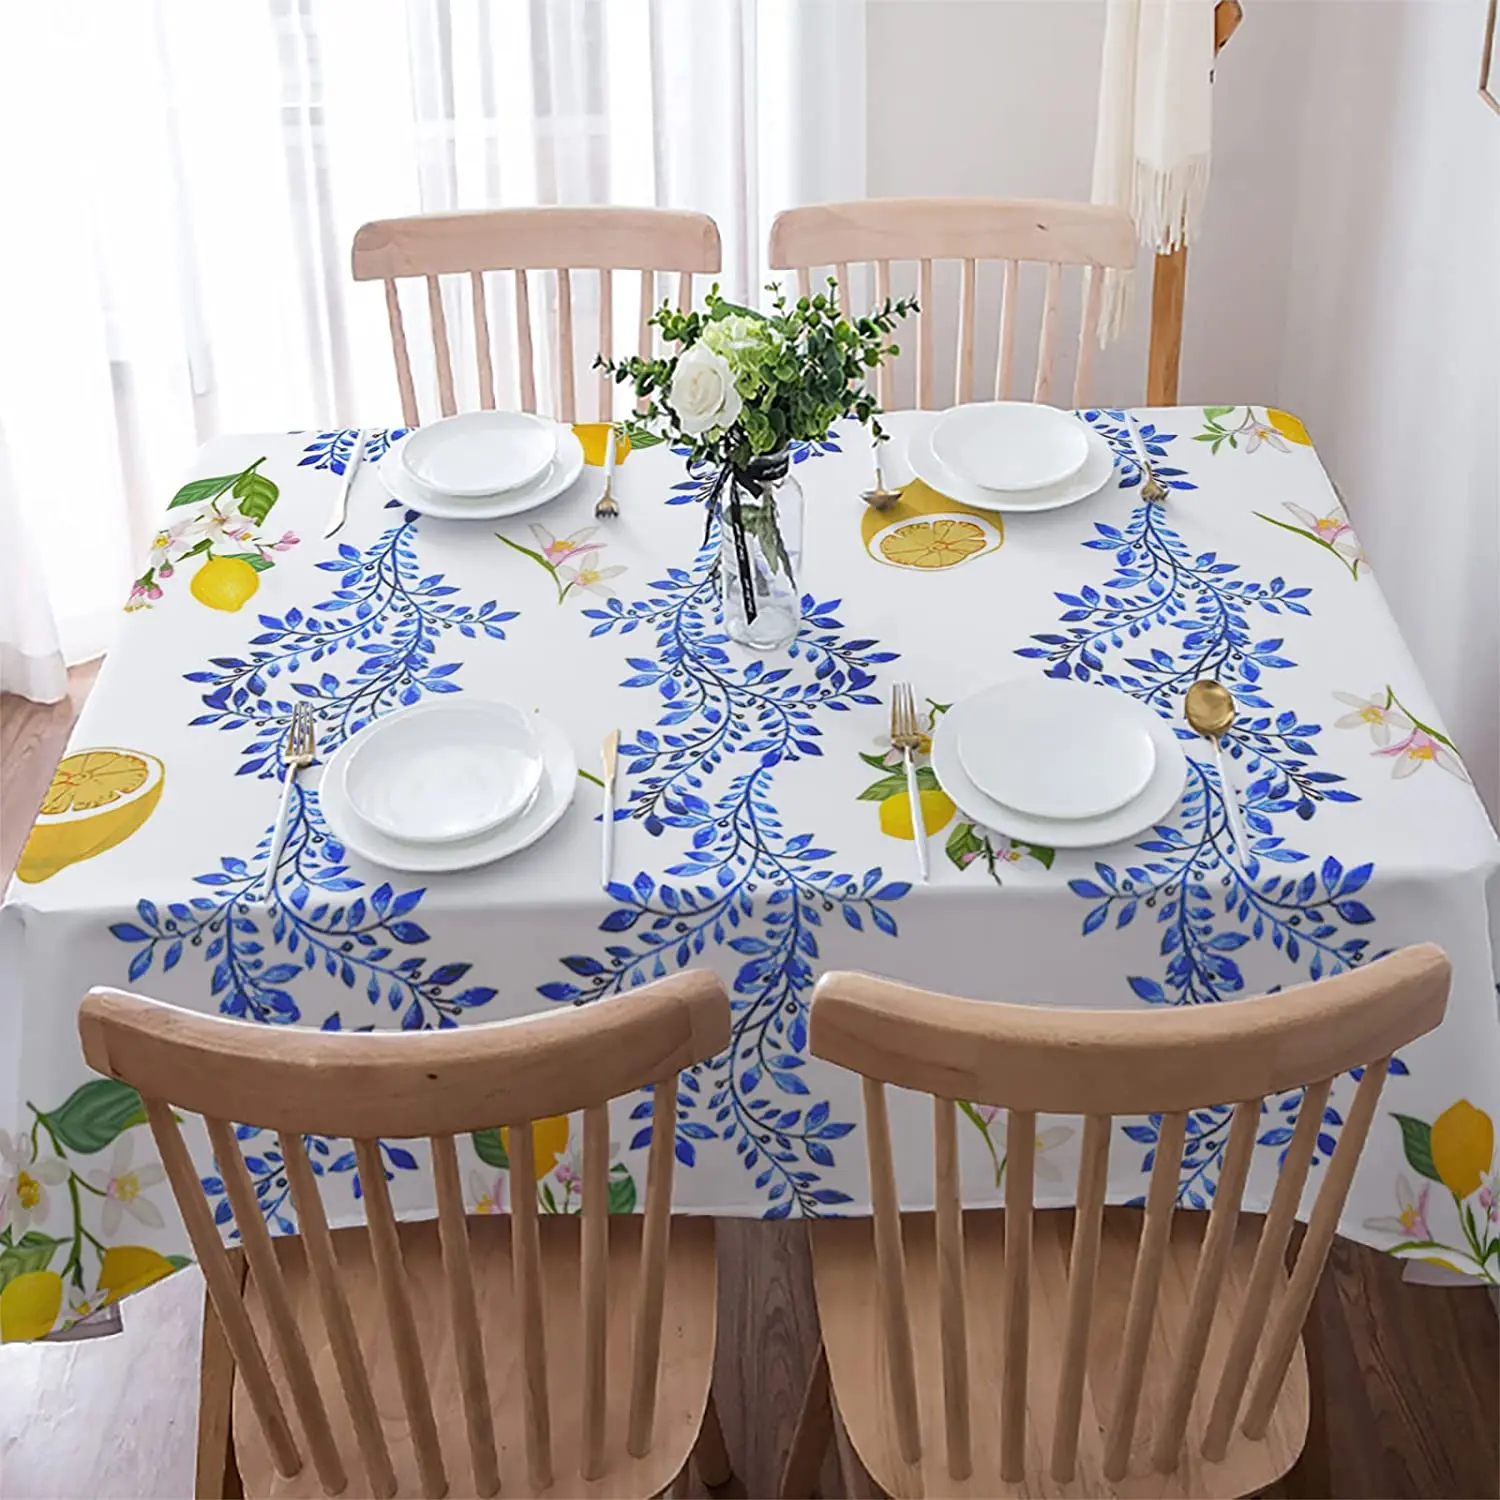 

Summer Lemon Blue Leaves Rectangle Tablecloths Holiday Party Decorations Waterproof Table Tablecloth for Kitchen Dining Decor